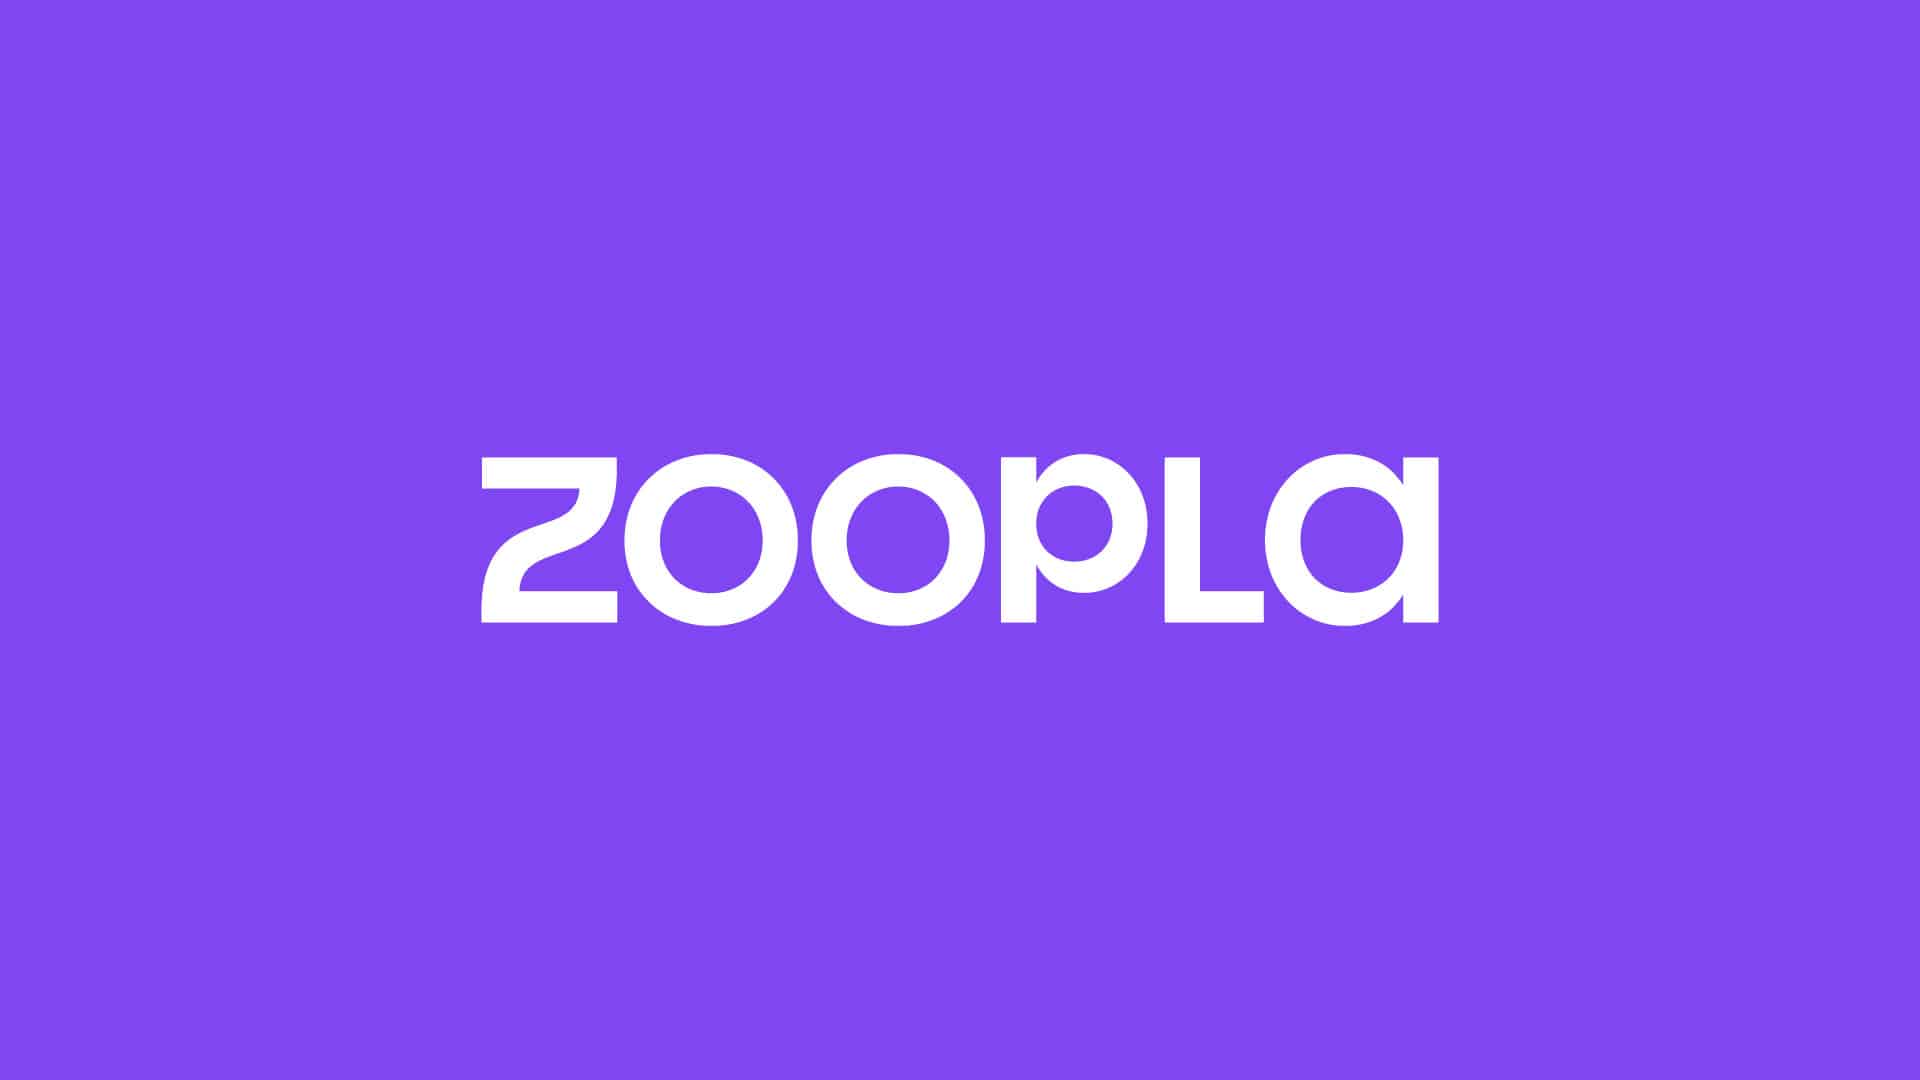 Zoopla launches campaign to drive agents' gains as 42% of UK households consider selling